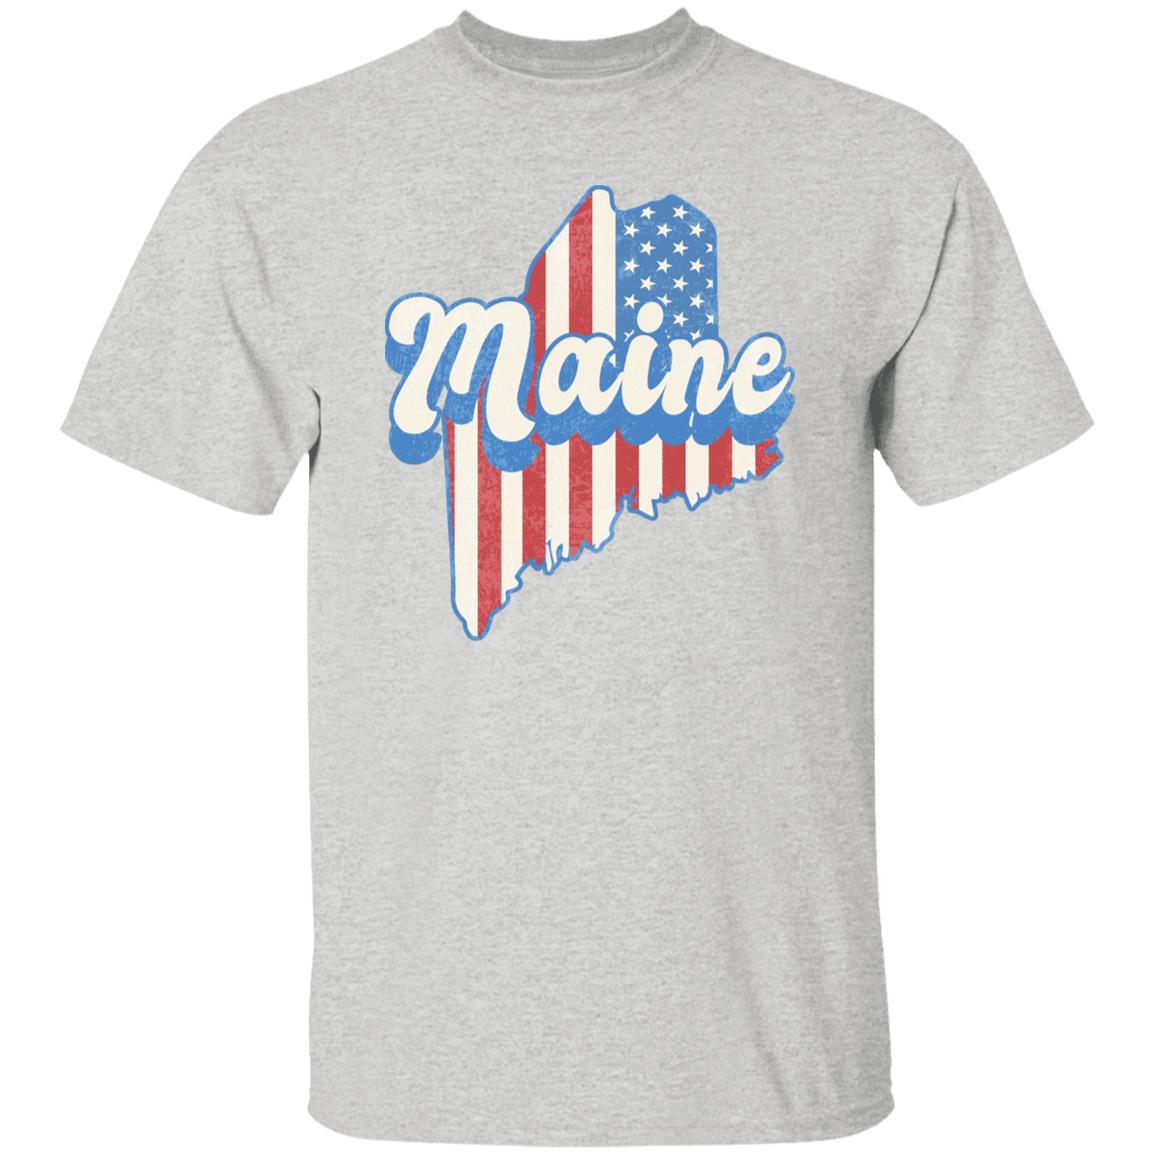 Maine US flag Unisex T-Shirt American patriotic ME state tee White Ash Blue-Ash-Family-Gift-Planet